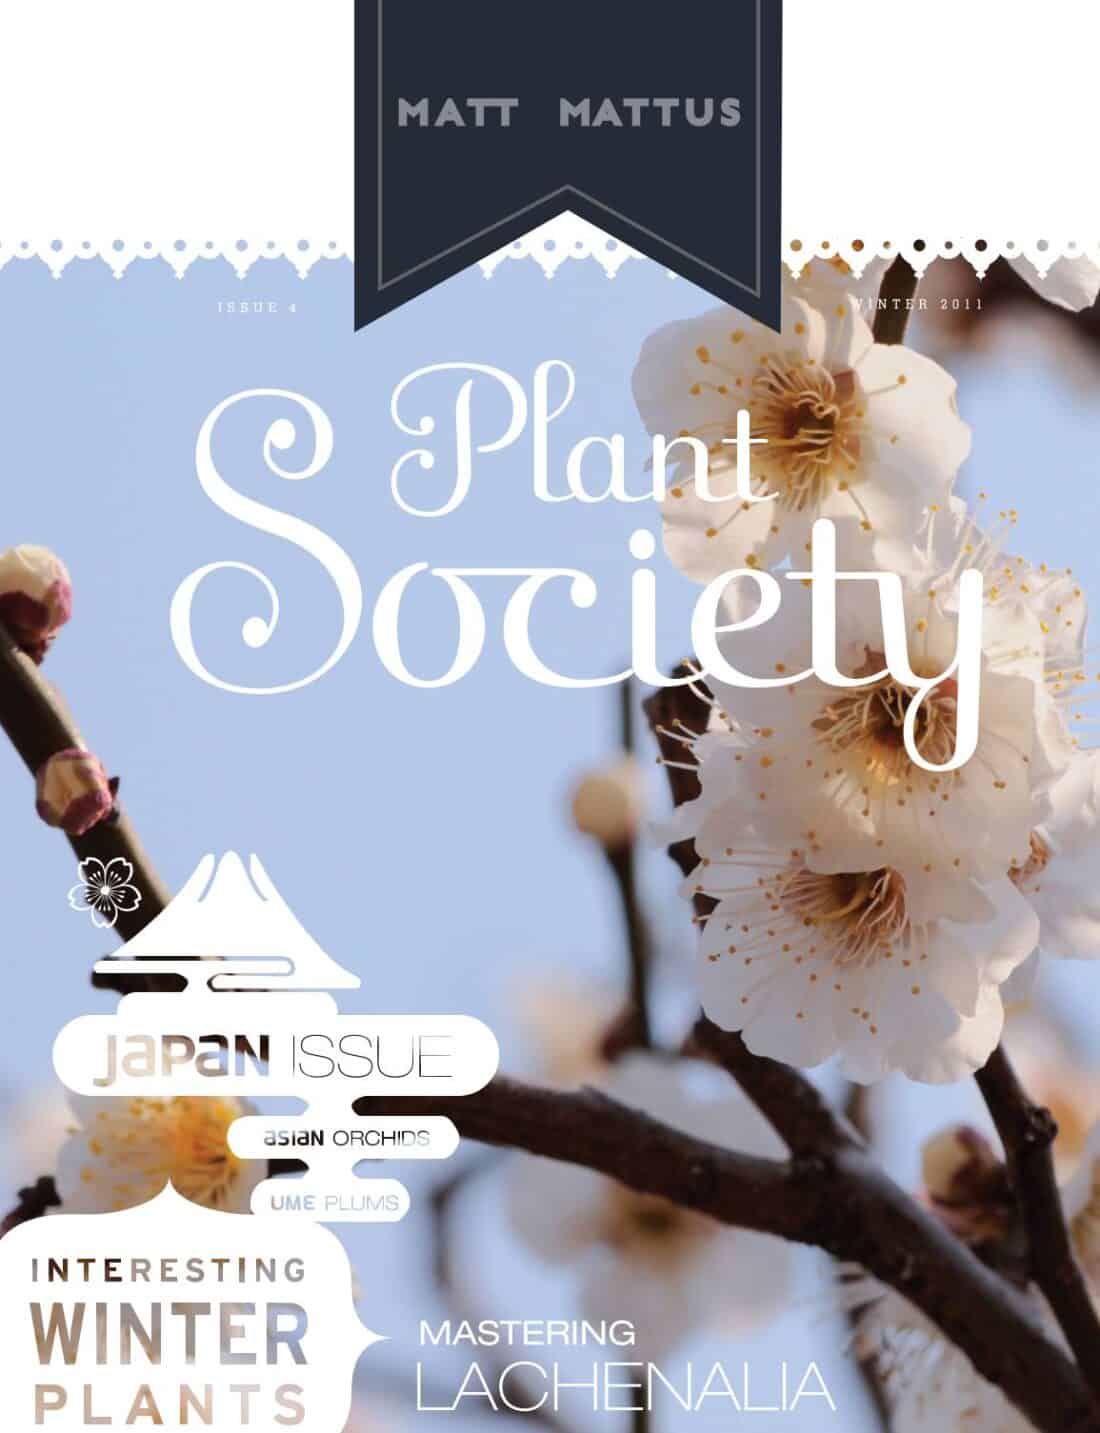 Cover of 'plant society' magazine featuring close-up photography of white blossoms, focusing on japanese winter plants.